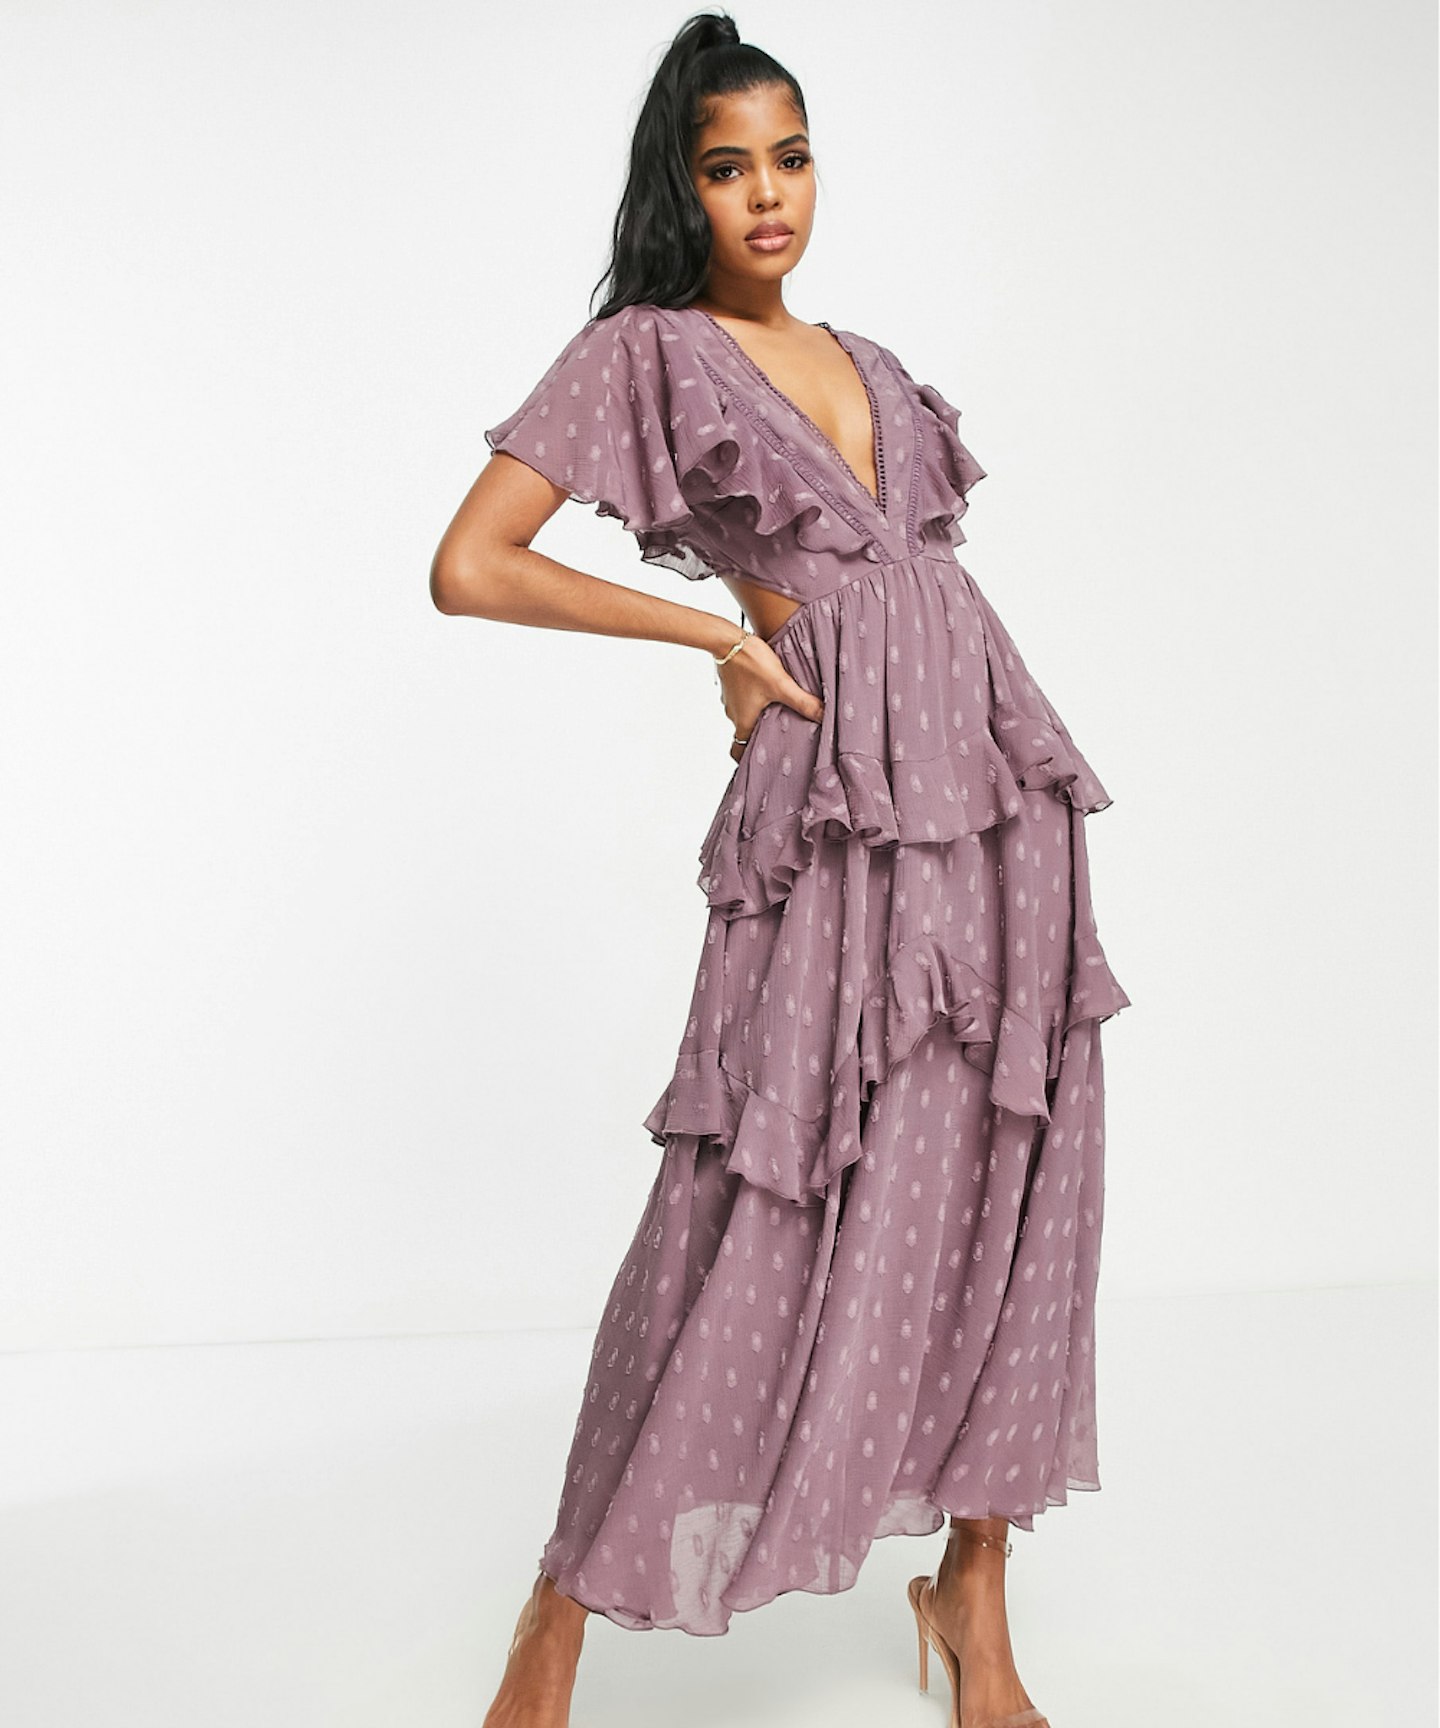 ASOS Wedding Guest Dresses 2022: Our Top Picks To Buy